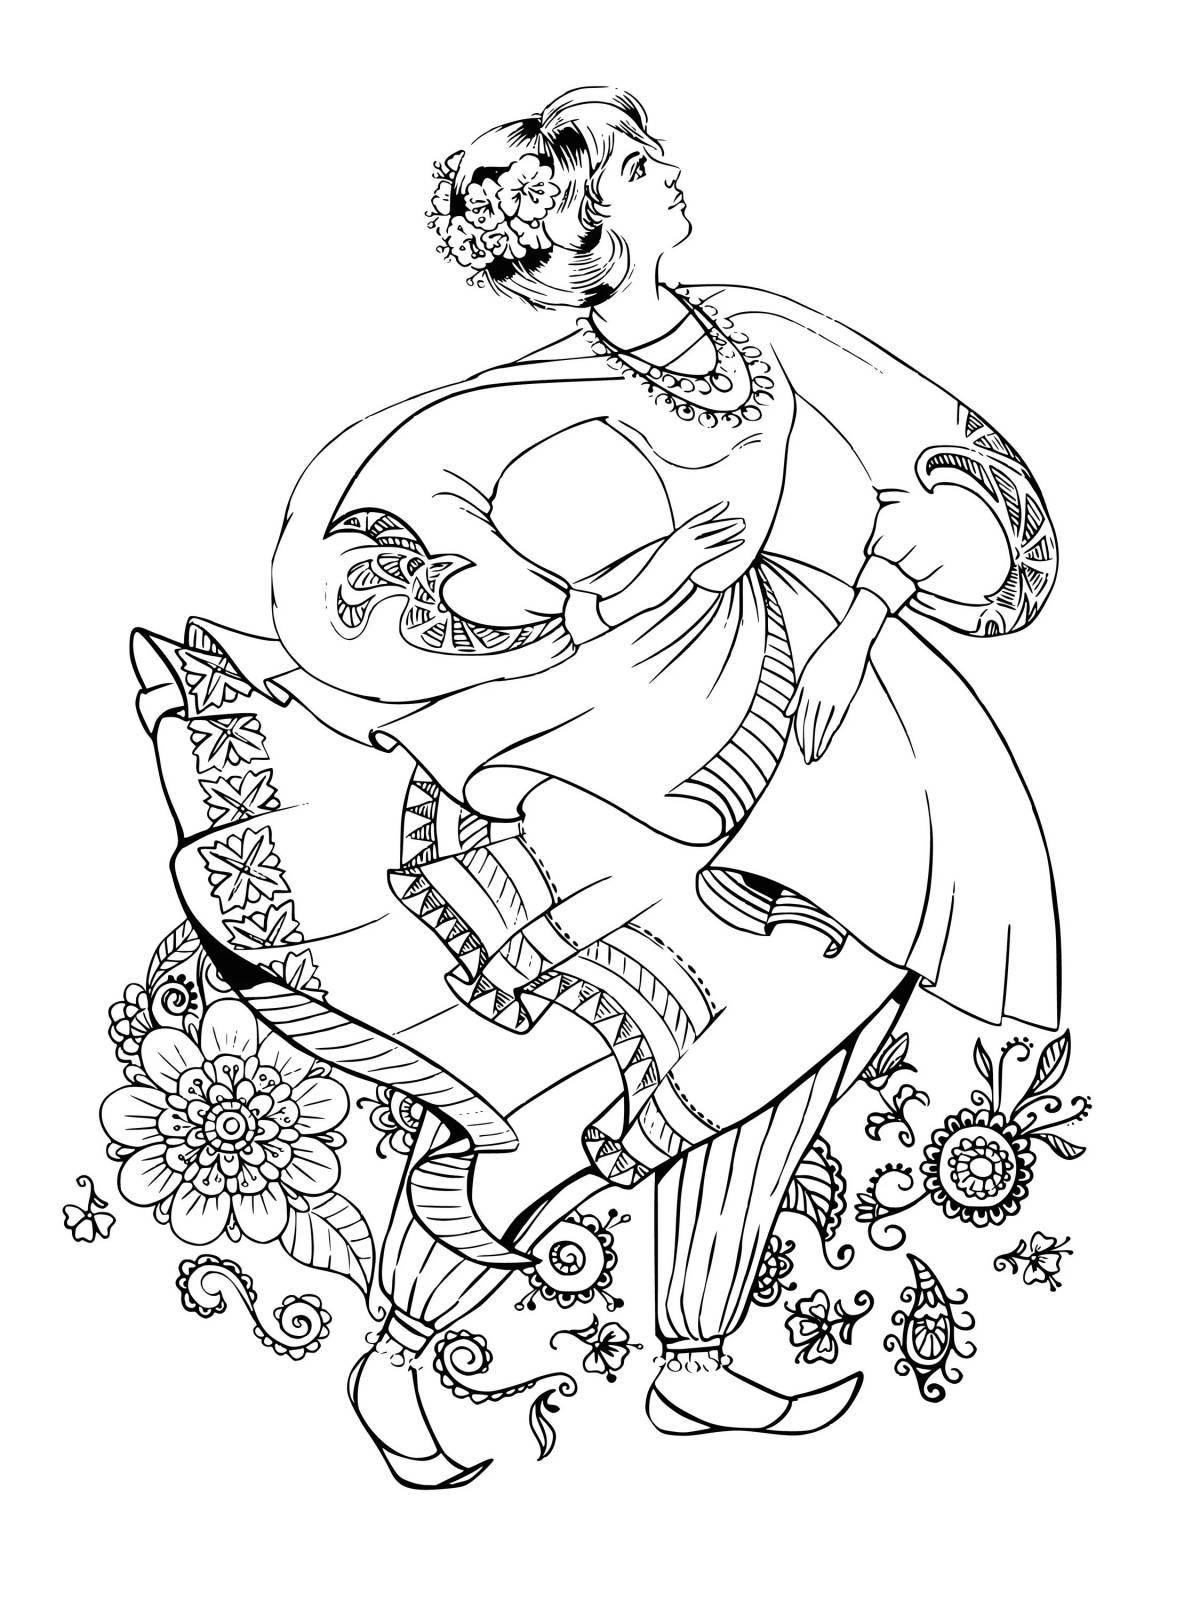 Coloring page playful russian dance